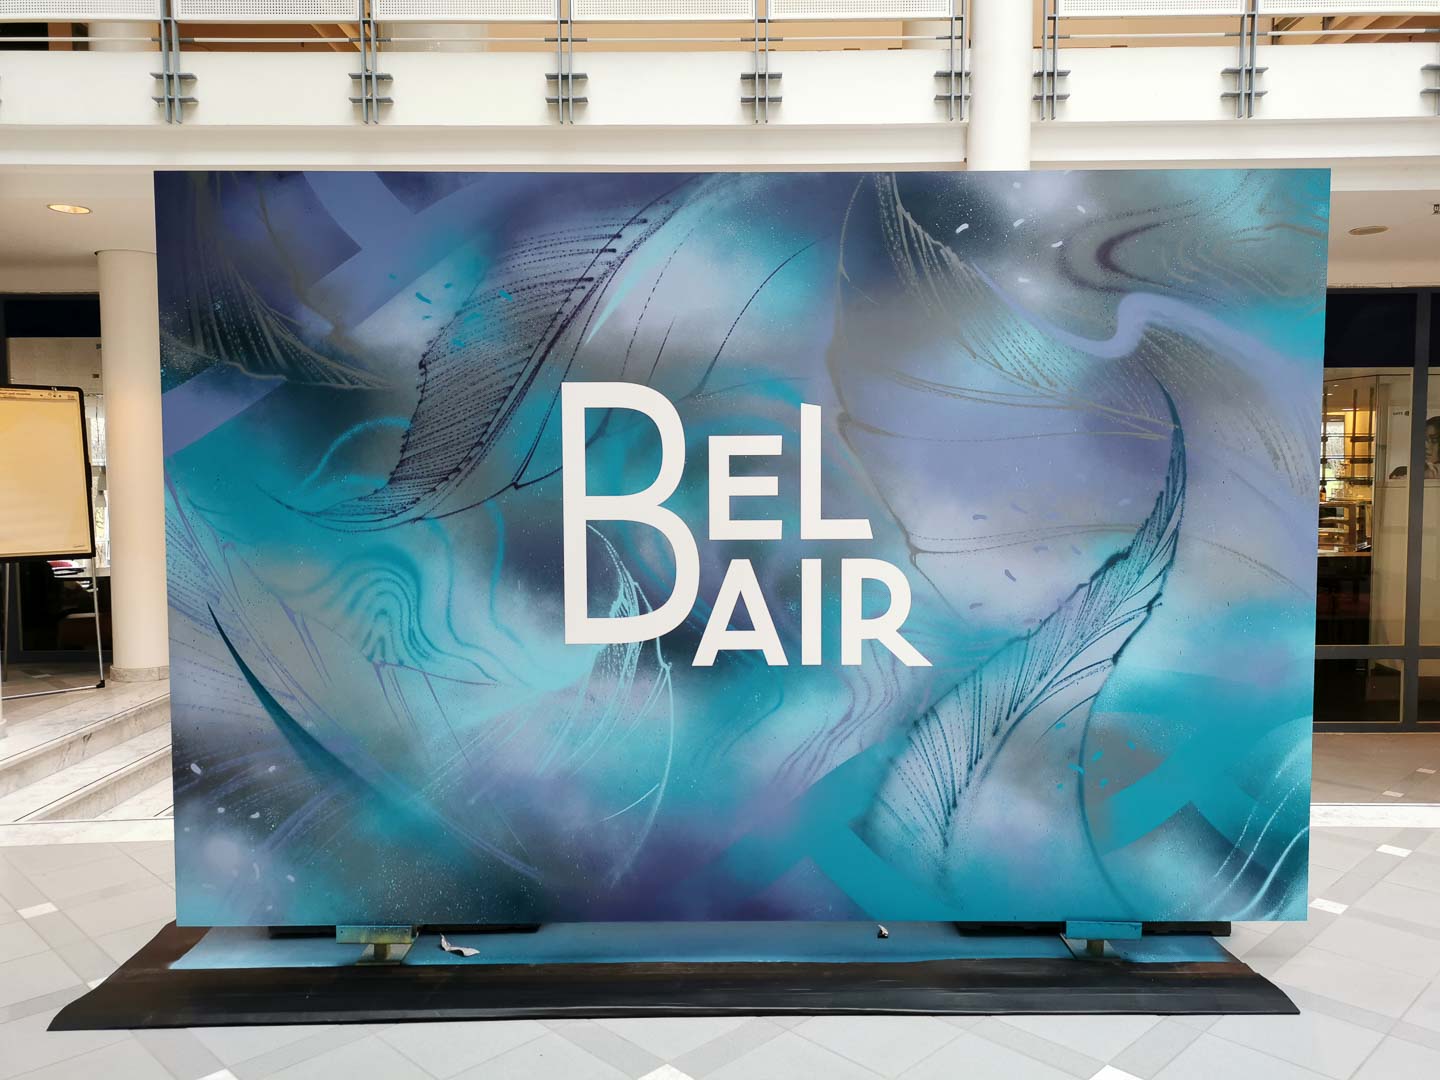 Creation of an installation for the opening day of the "Bel Air" in Oberursel